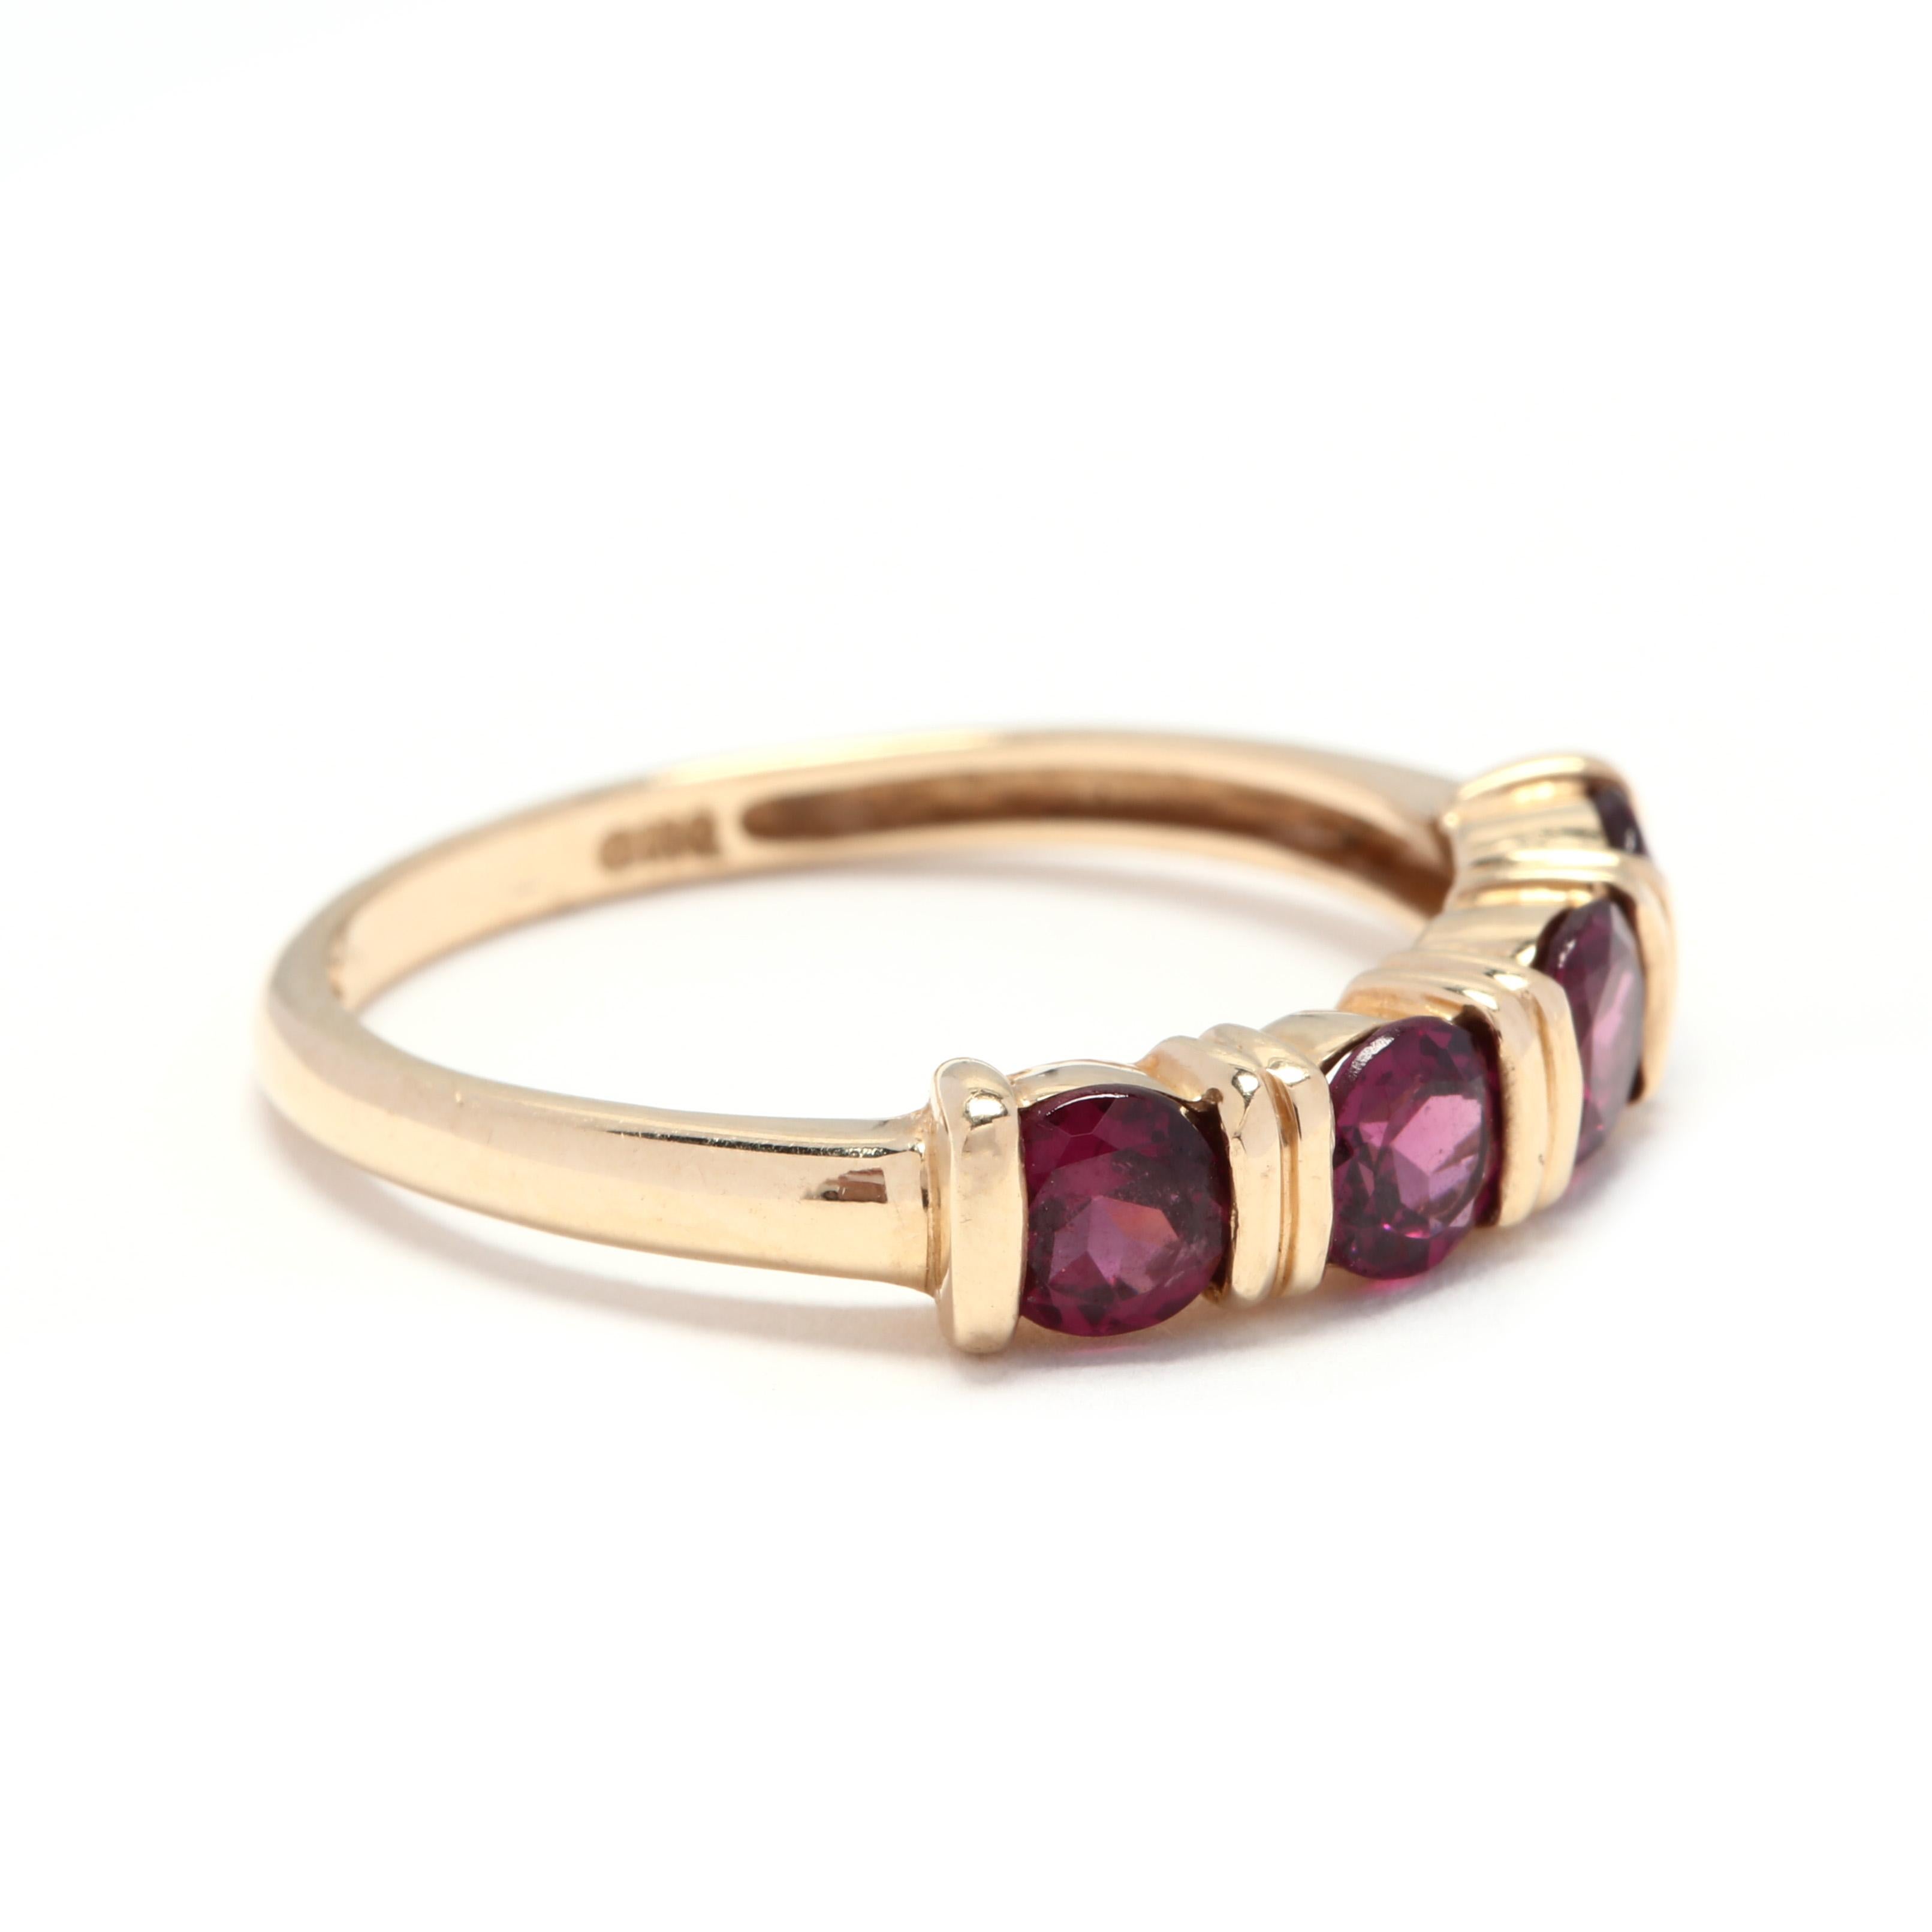 A 14 karat yellow gold and garnet stackable band. A minimalist design with four bar set, round cut garnets with ridged designs and a slightly tapered shank.

Stones:
- garnets, 4 stones
- round
- 4 mm
- approximately 1.4 total carats

Ring Size